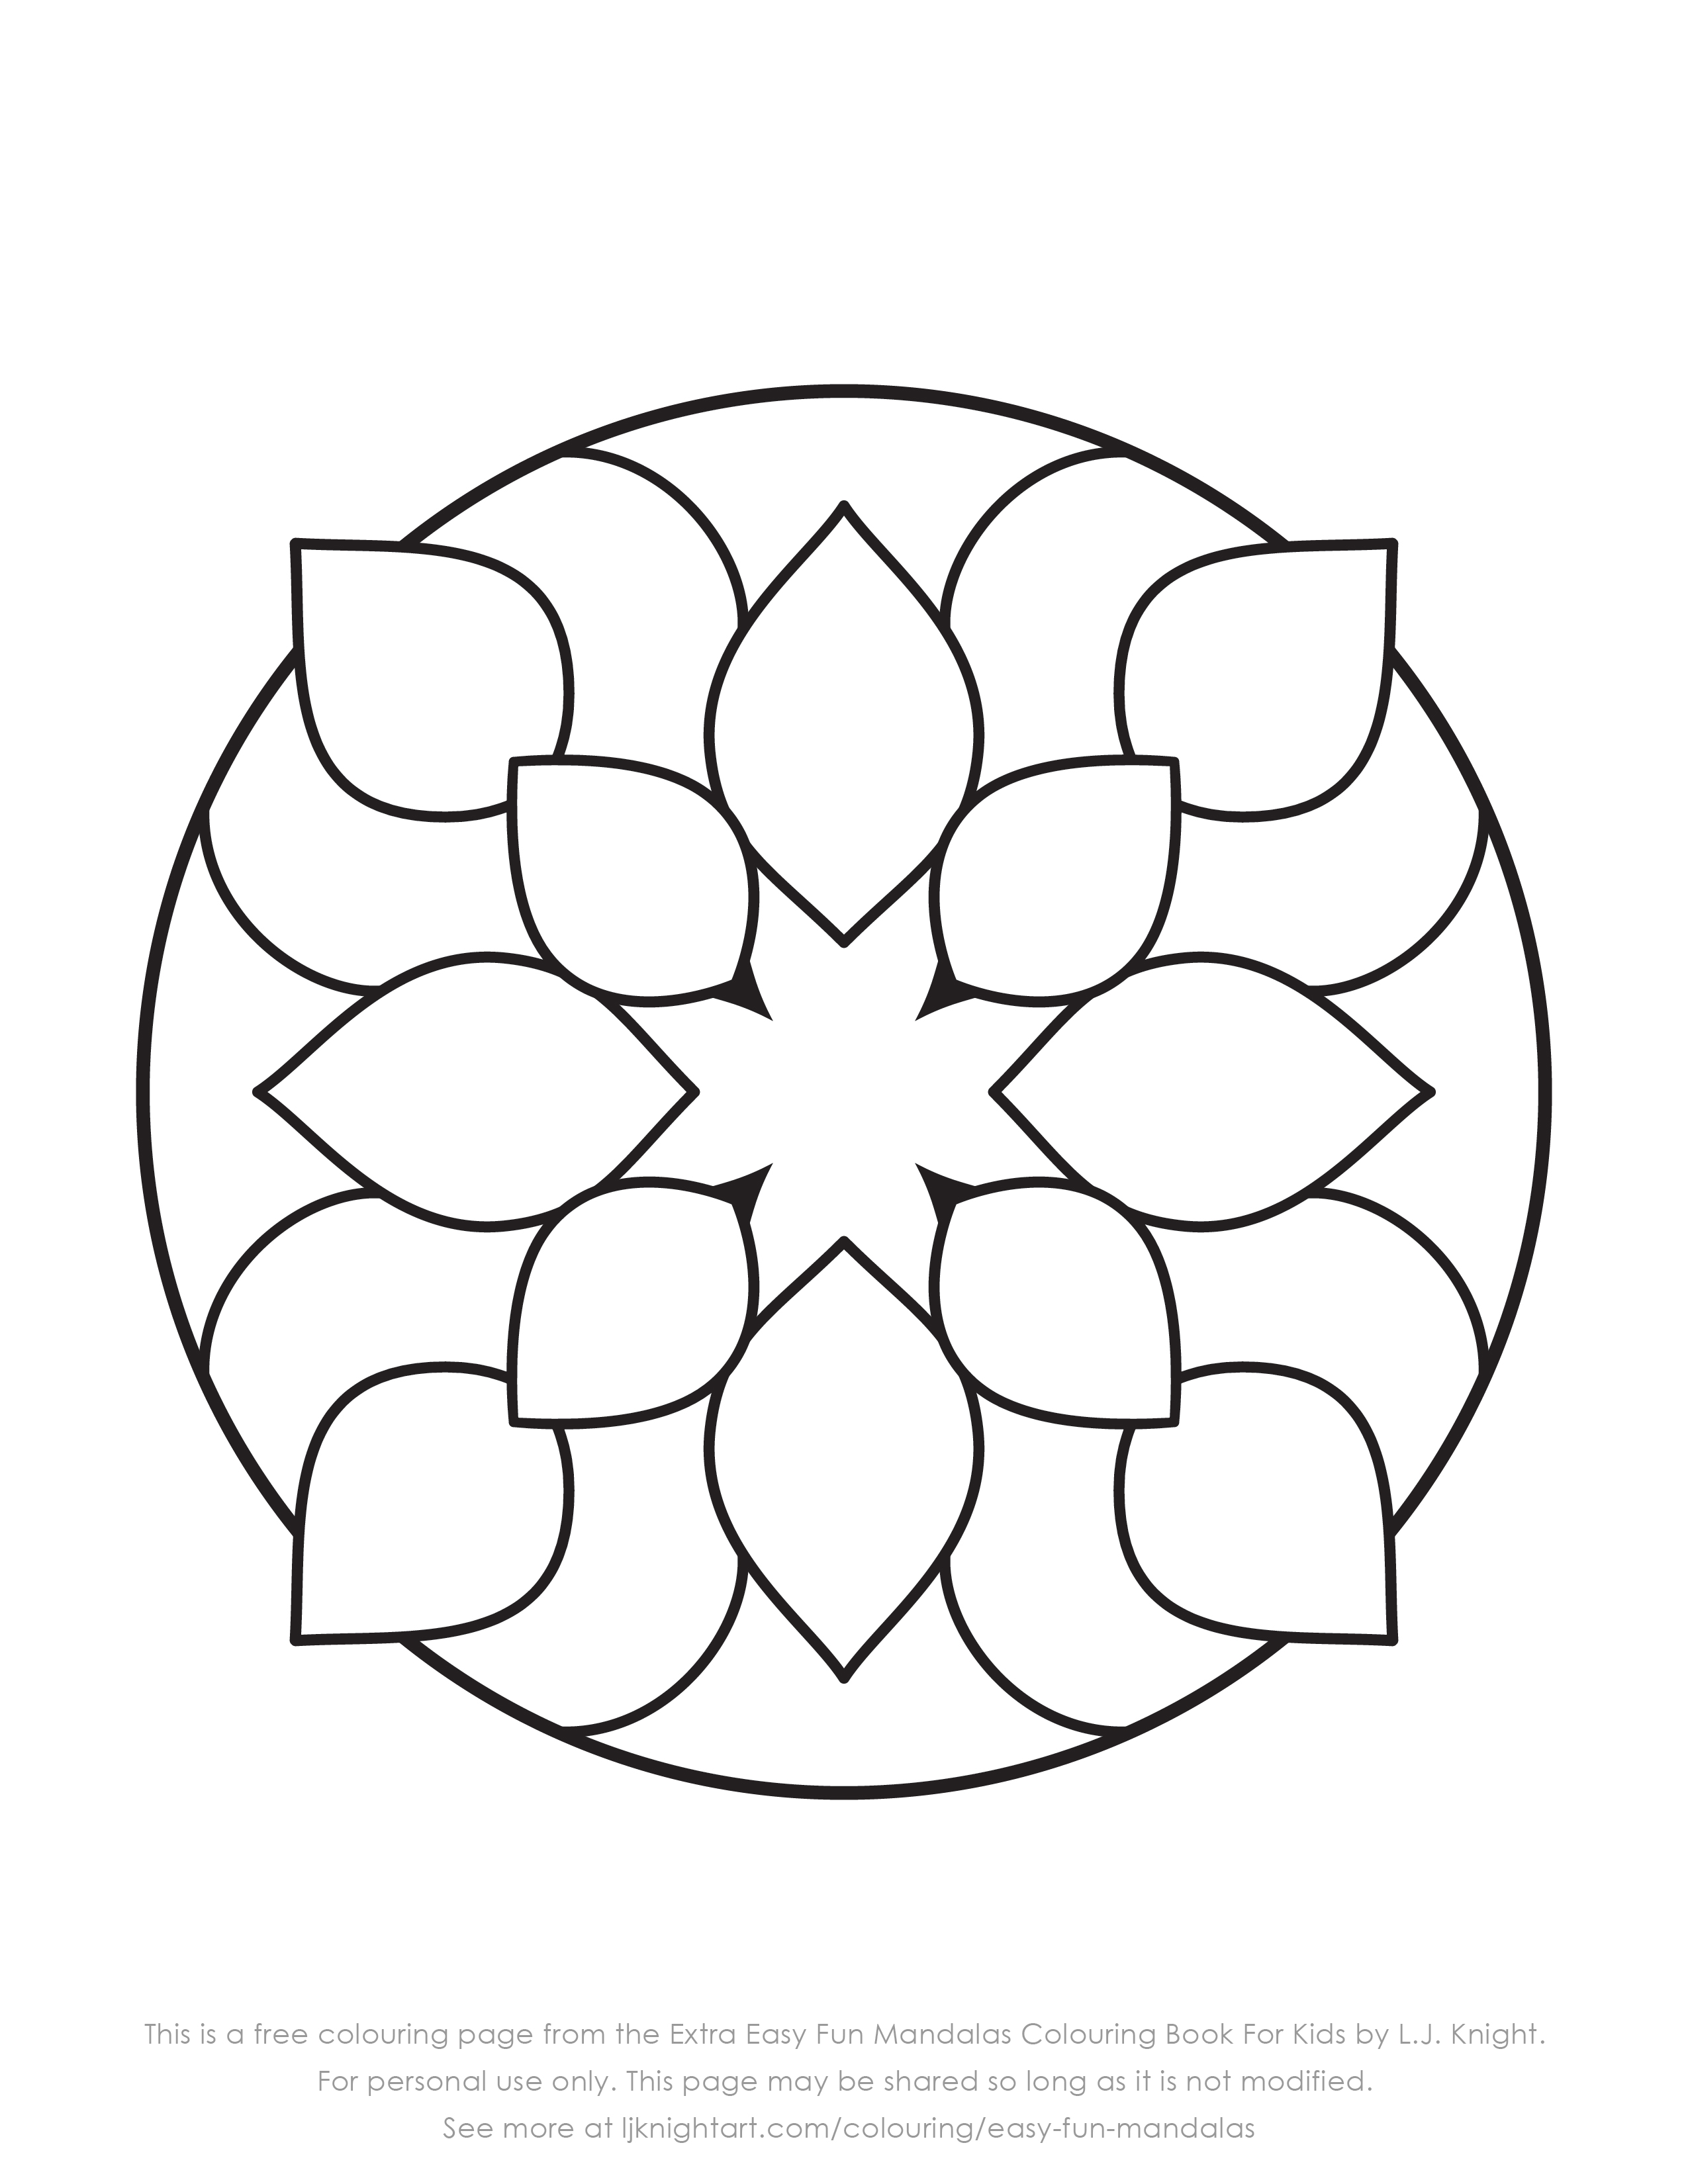 Free Very Simple Mandala Colouring Page For Kids Download L J Knight Art